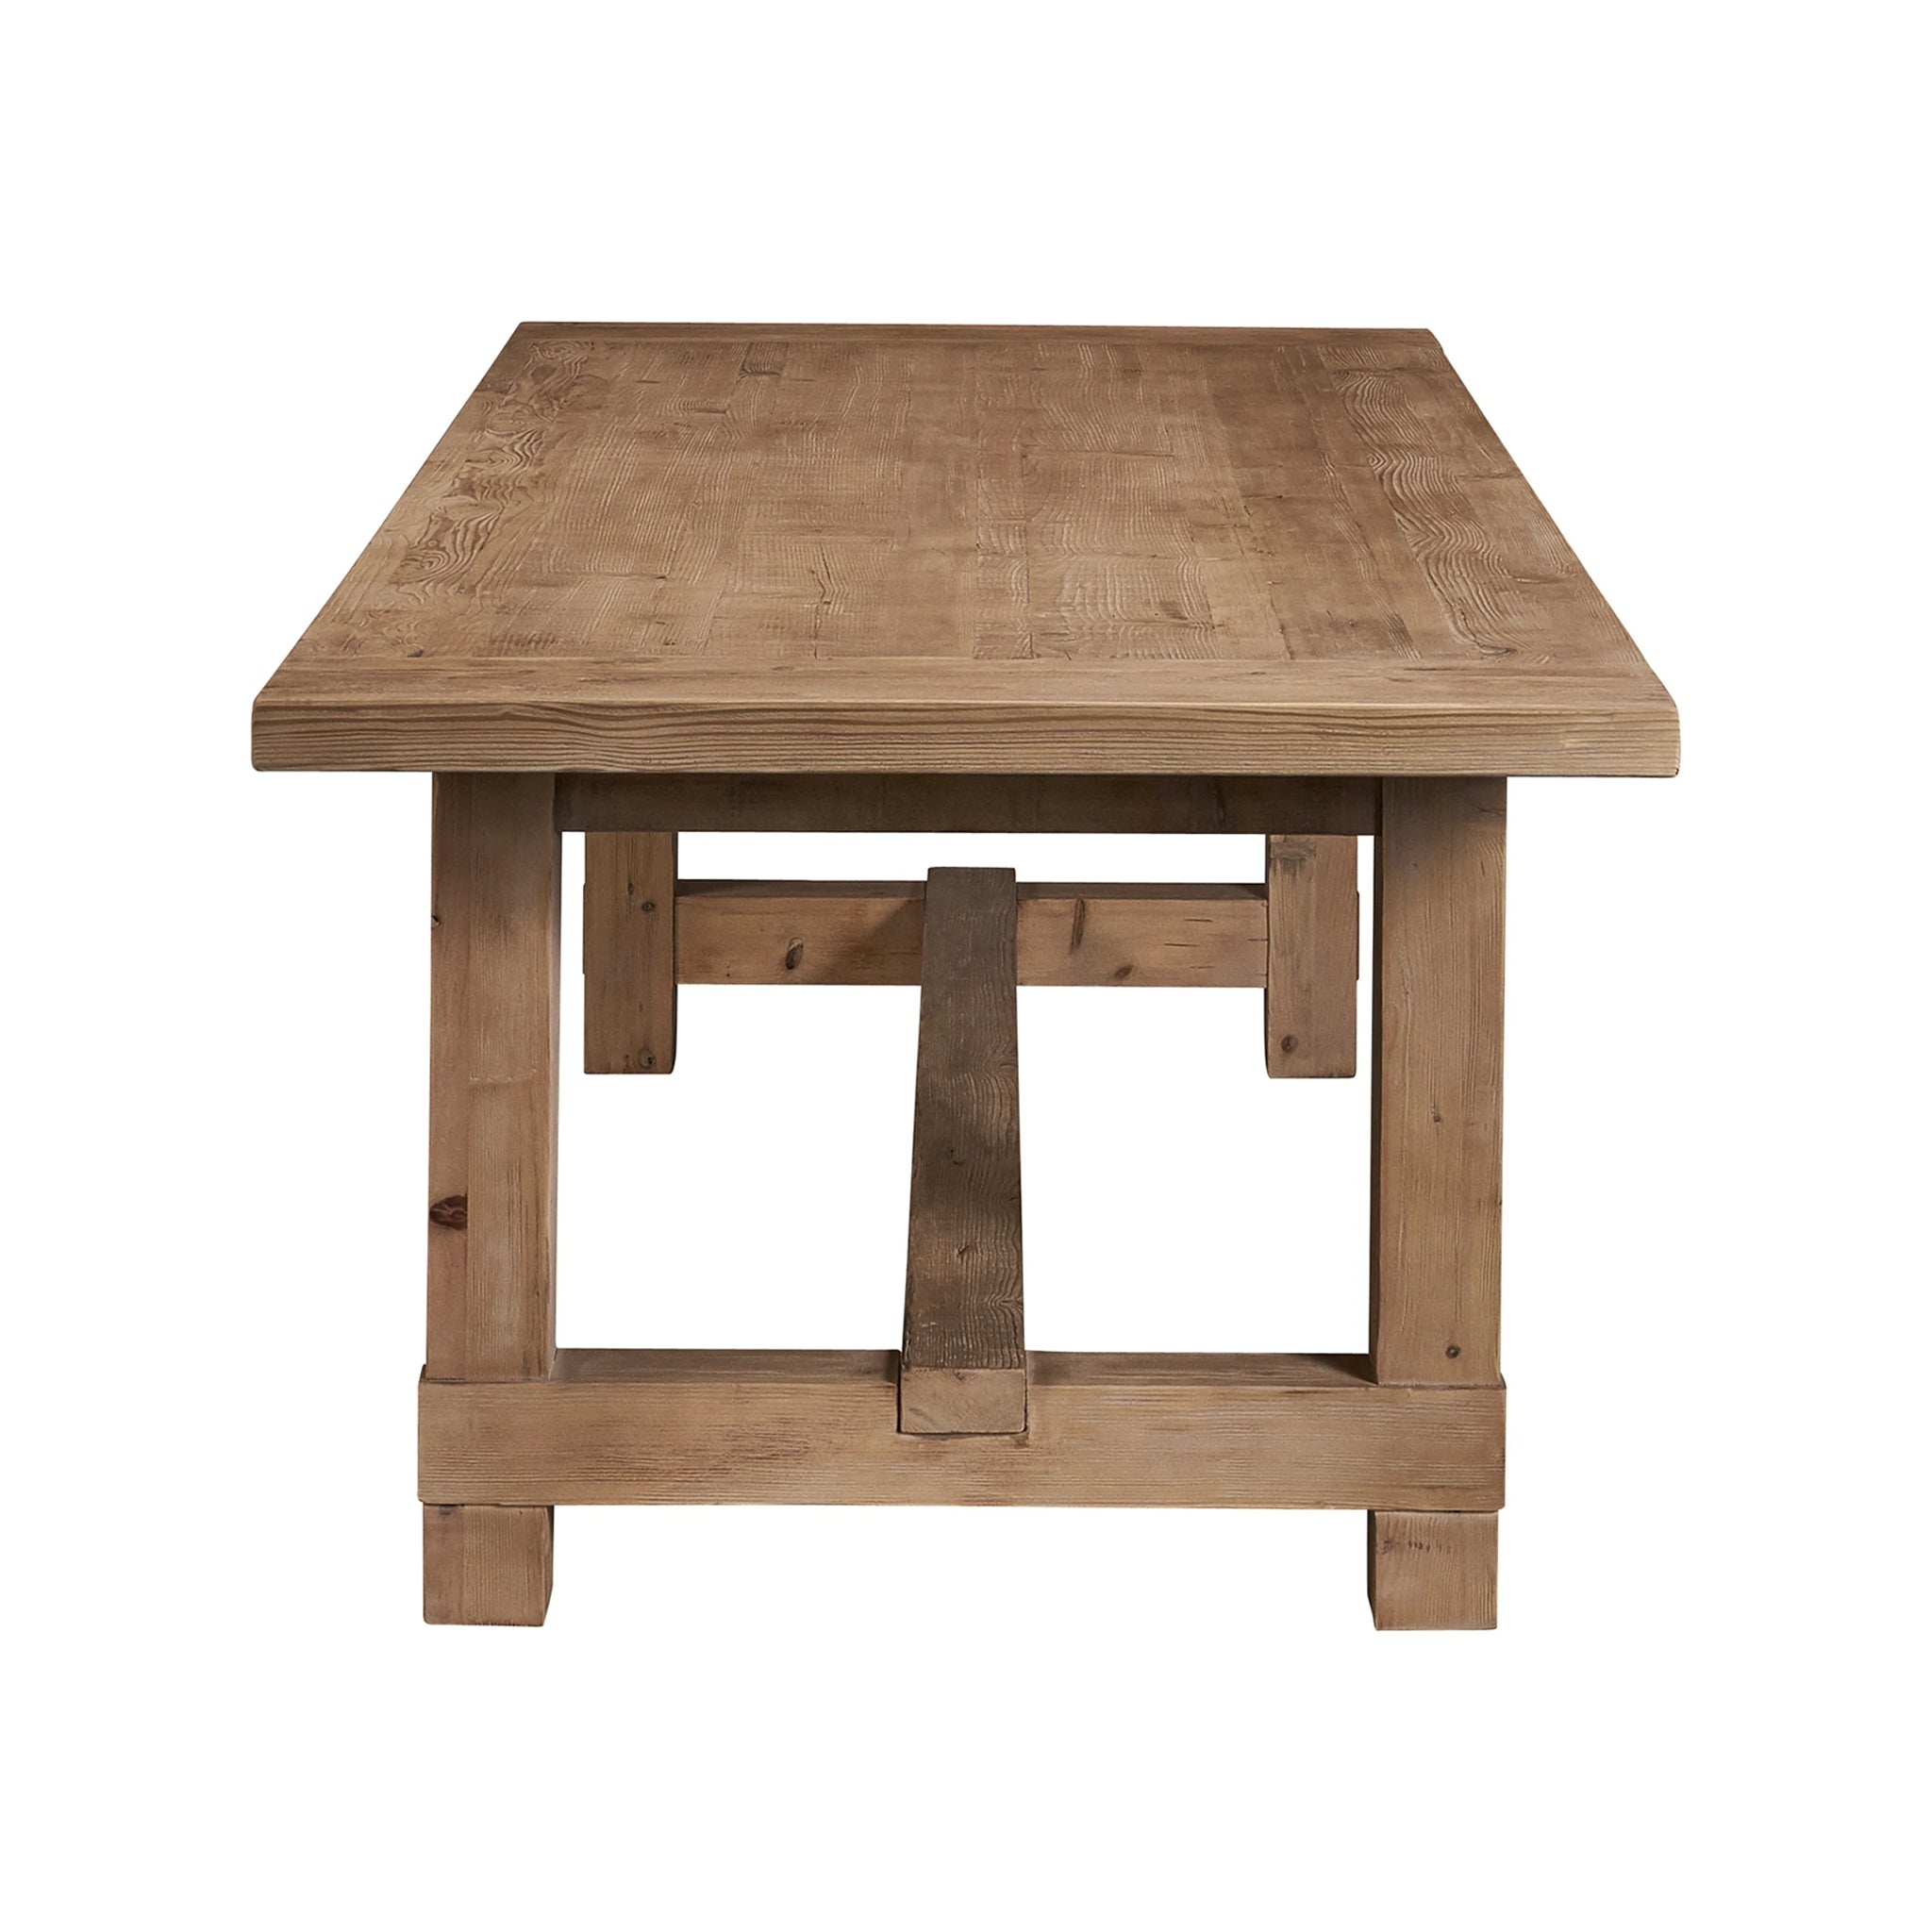 Gray Finish Rectangular Extension Pine Dining Table